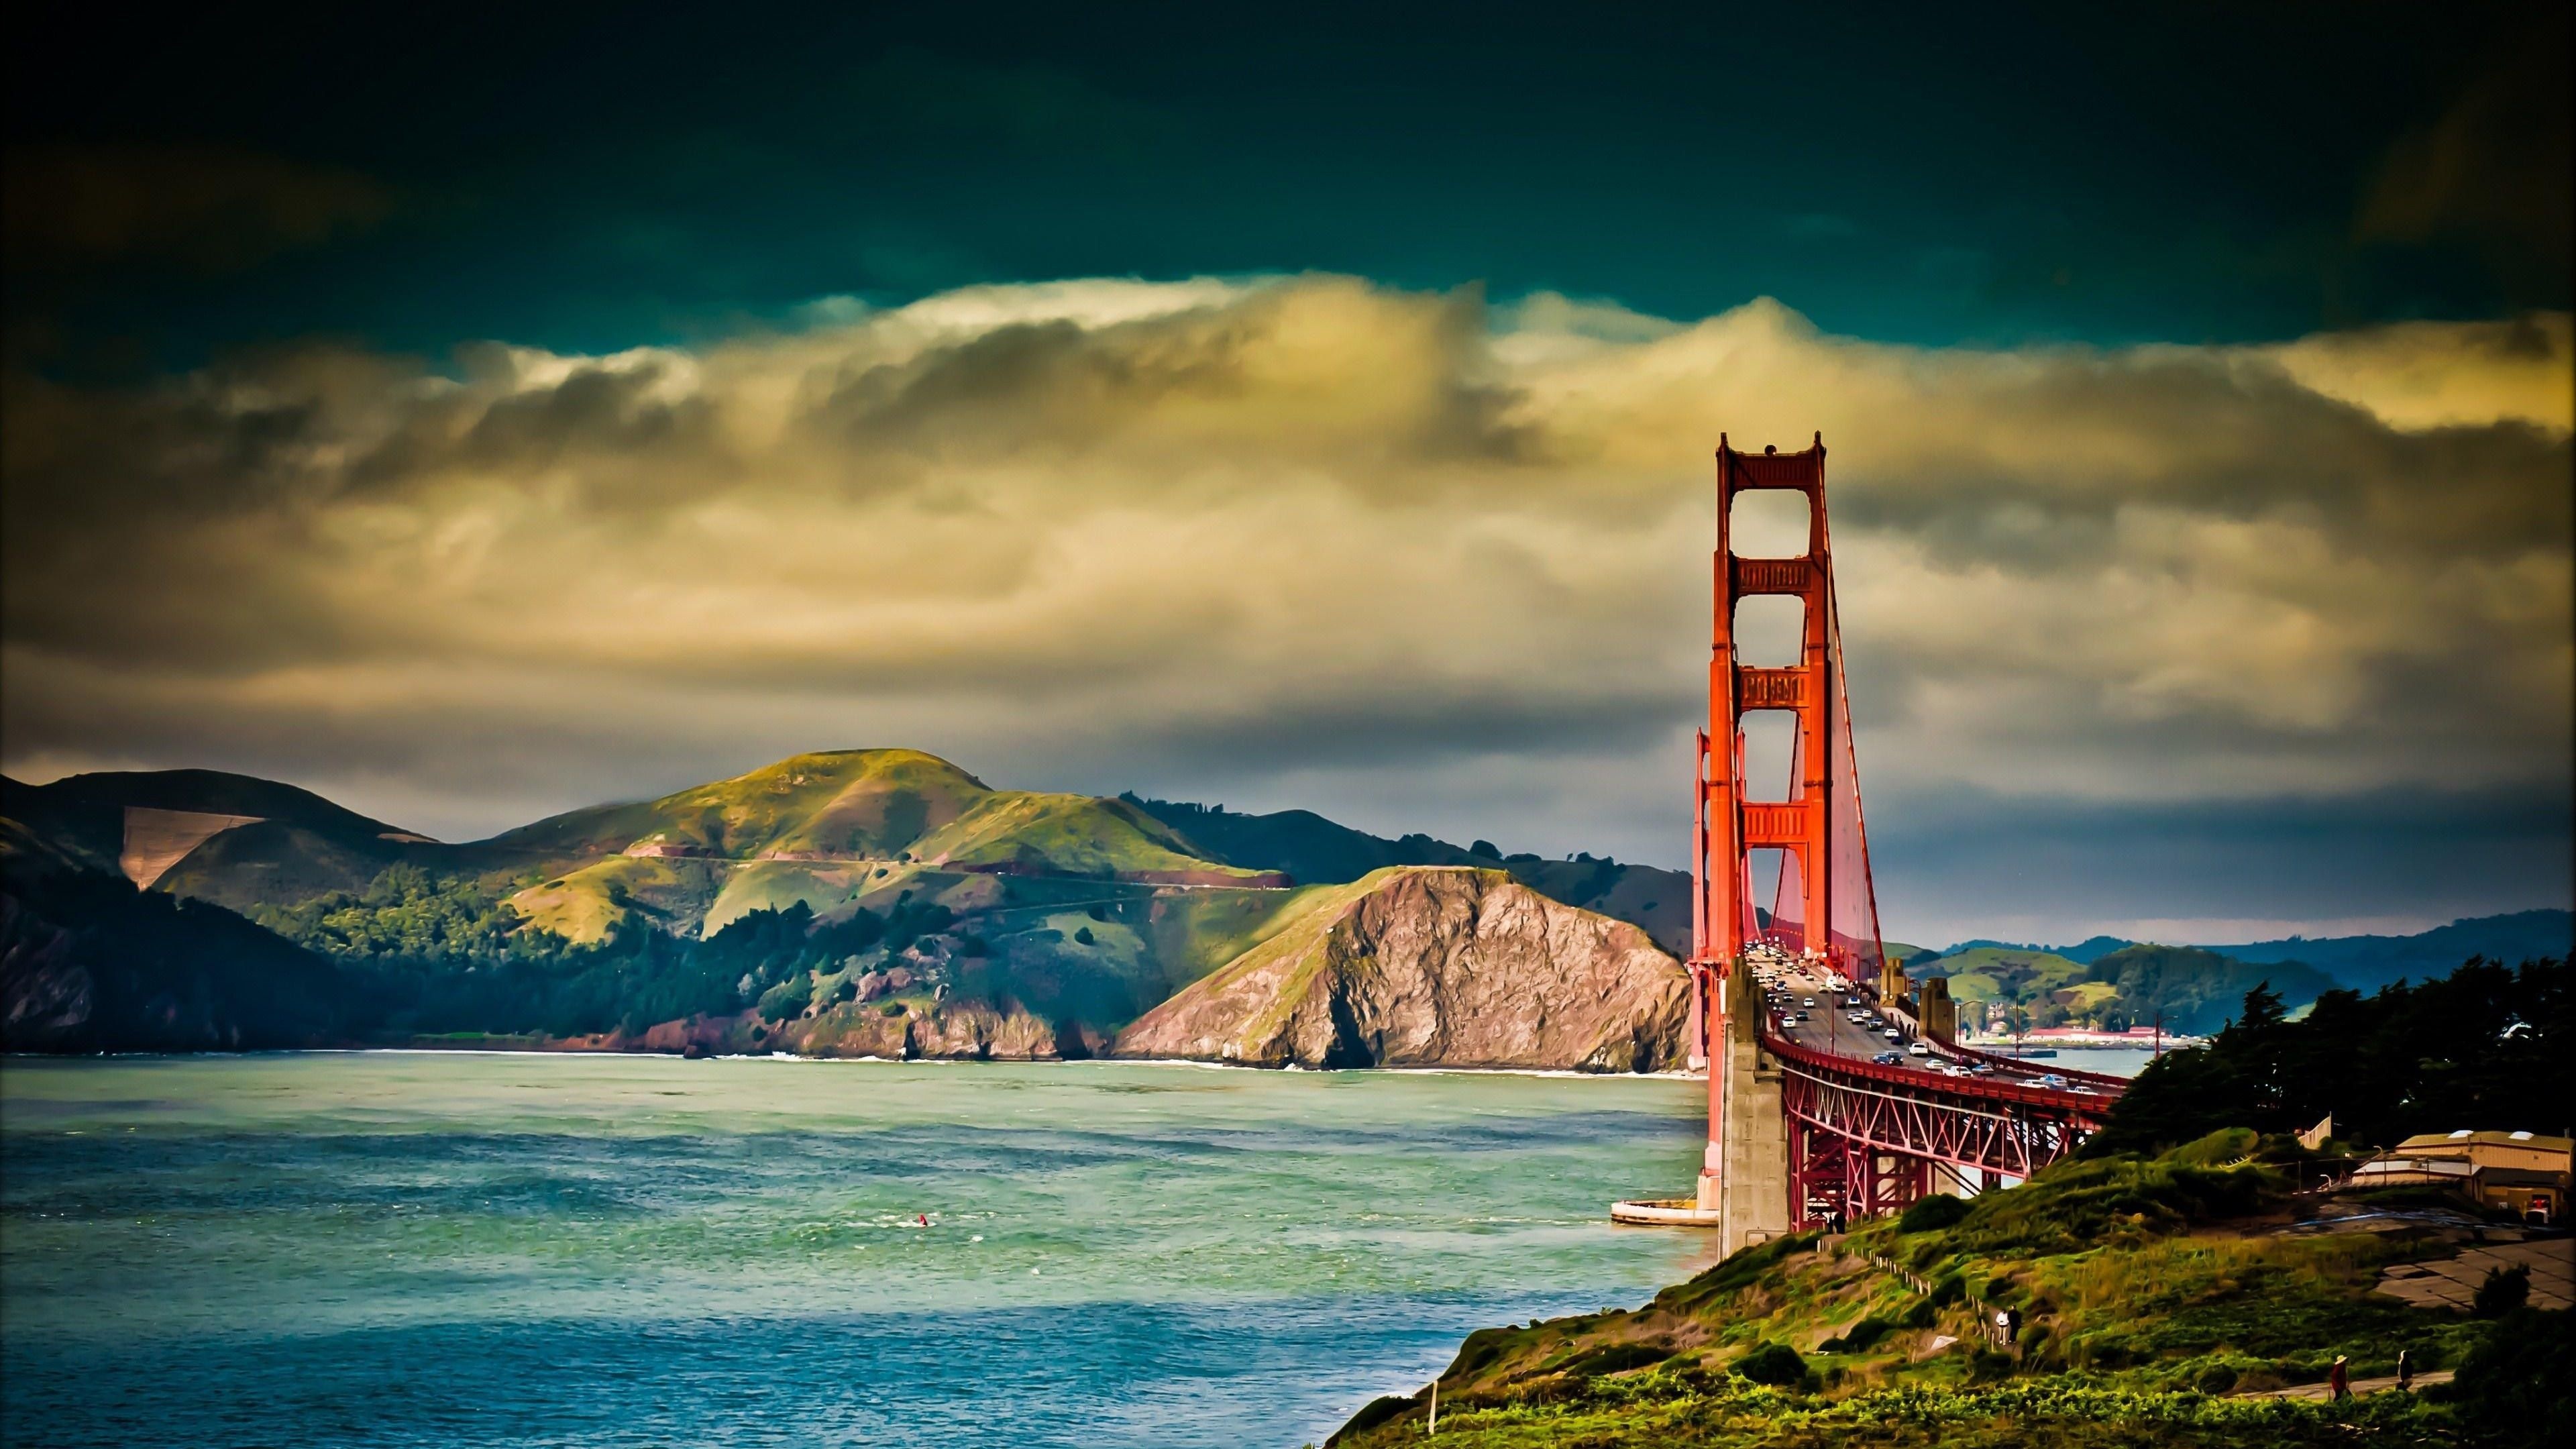 San Francisco: Recognized by the American Society of Civil Engineers as one of the Wonders of the Modern World. 3840x2160 4K Wallpaper.